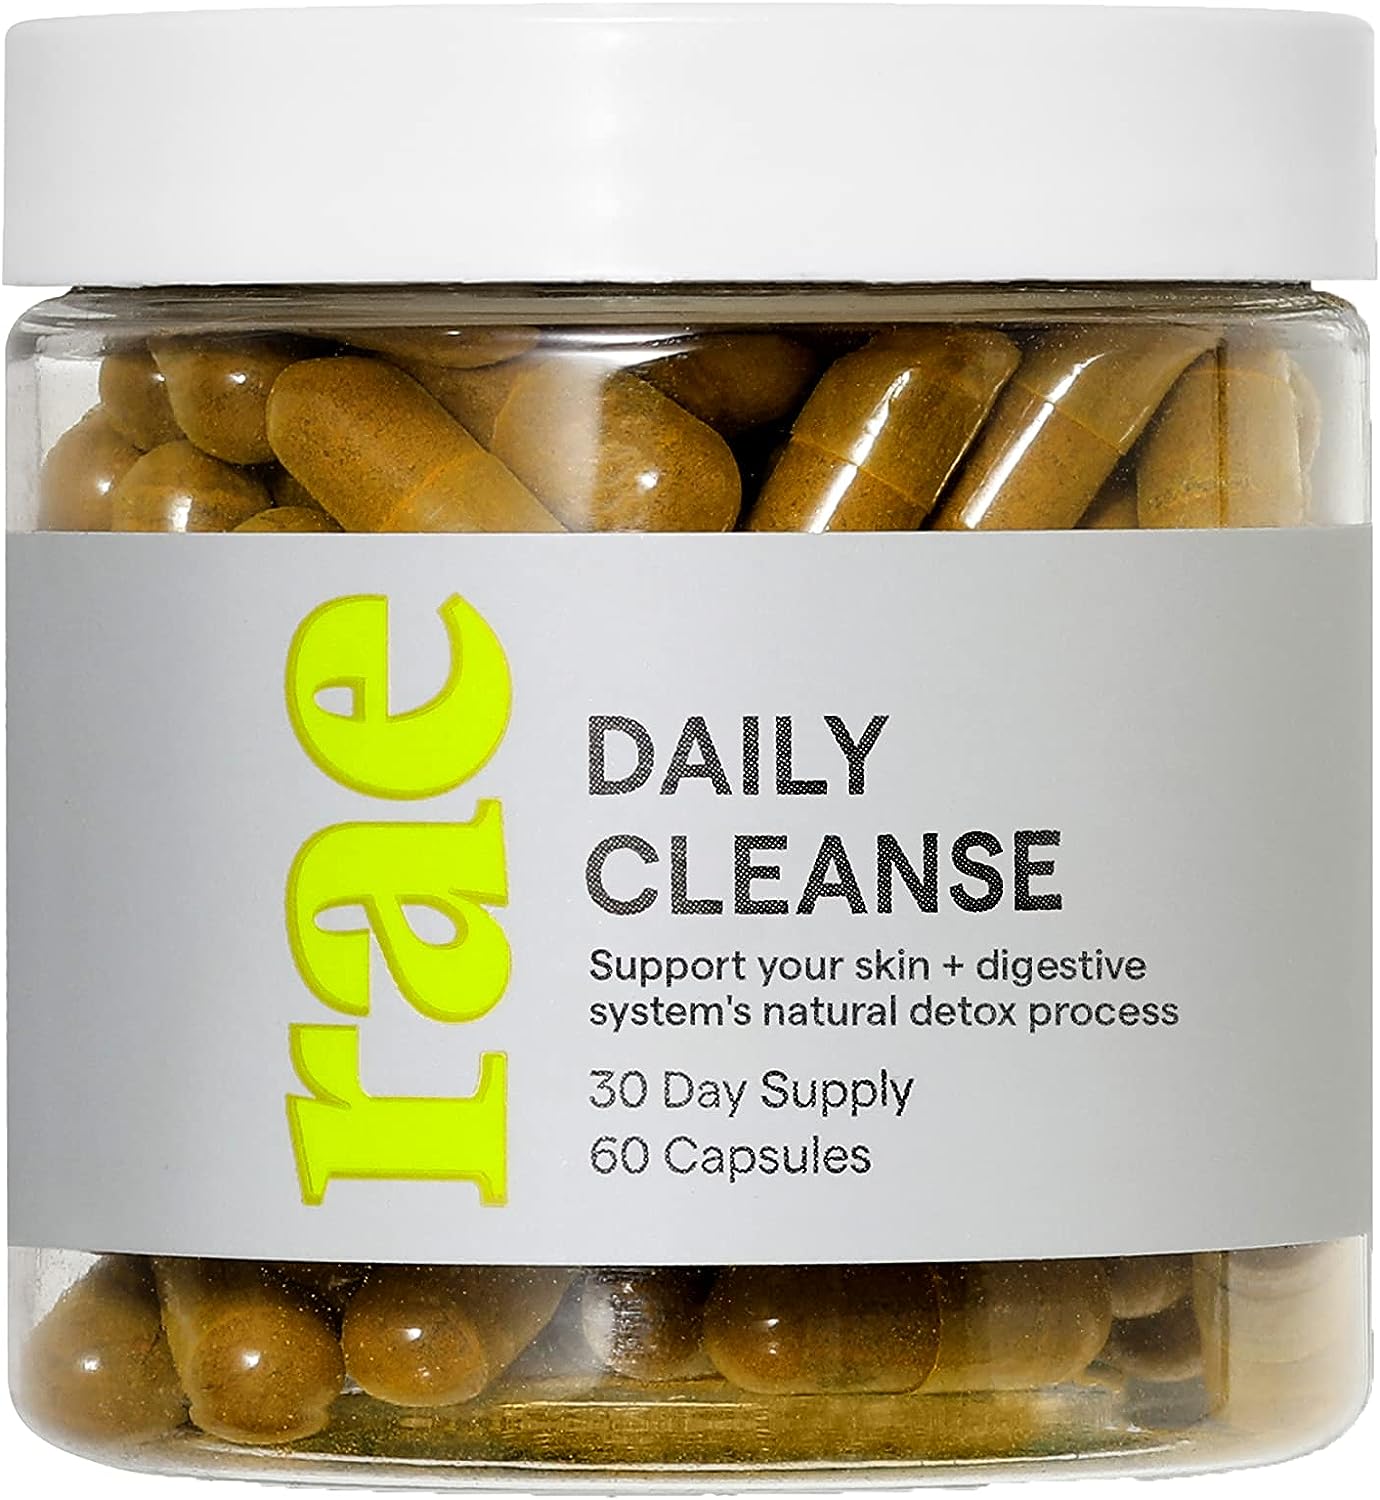 Rae Wellness Daily Cleanse - Support The Detox Process, Healthy Skin & Digestive Health with Aloe Vera, Vitamin C, Psyll